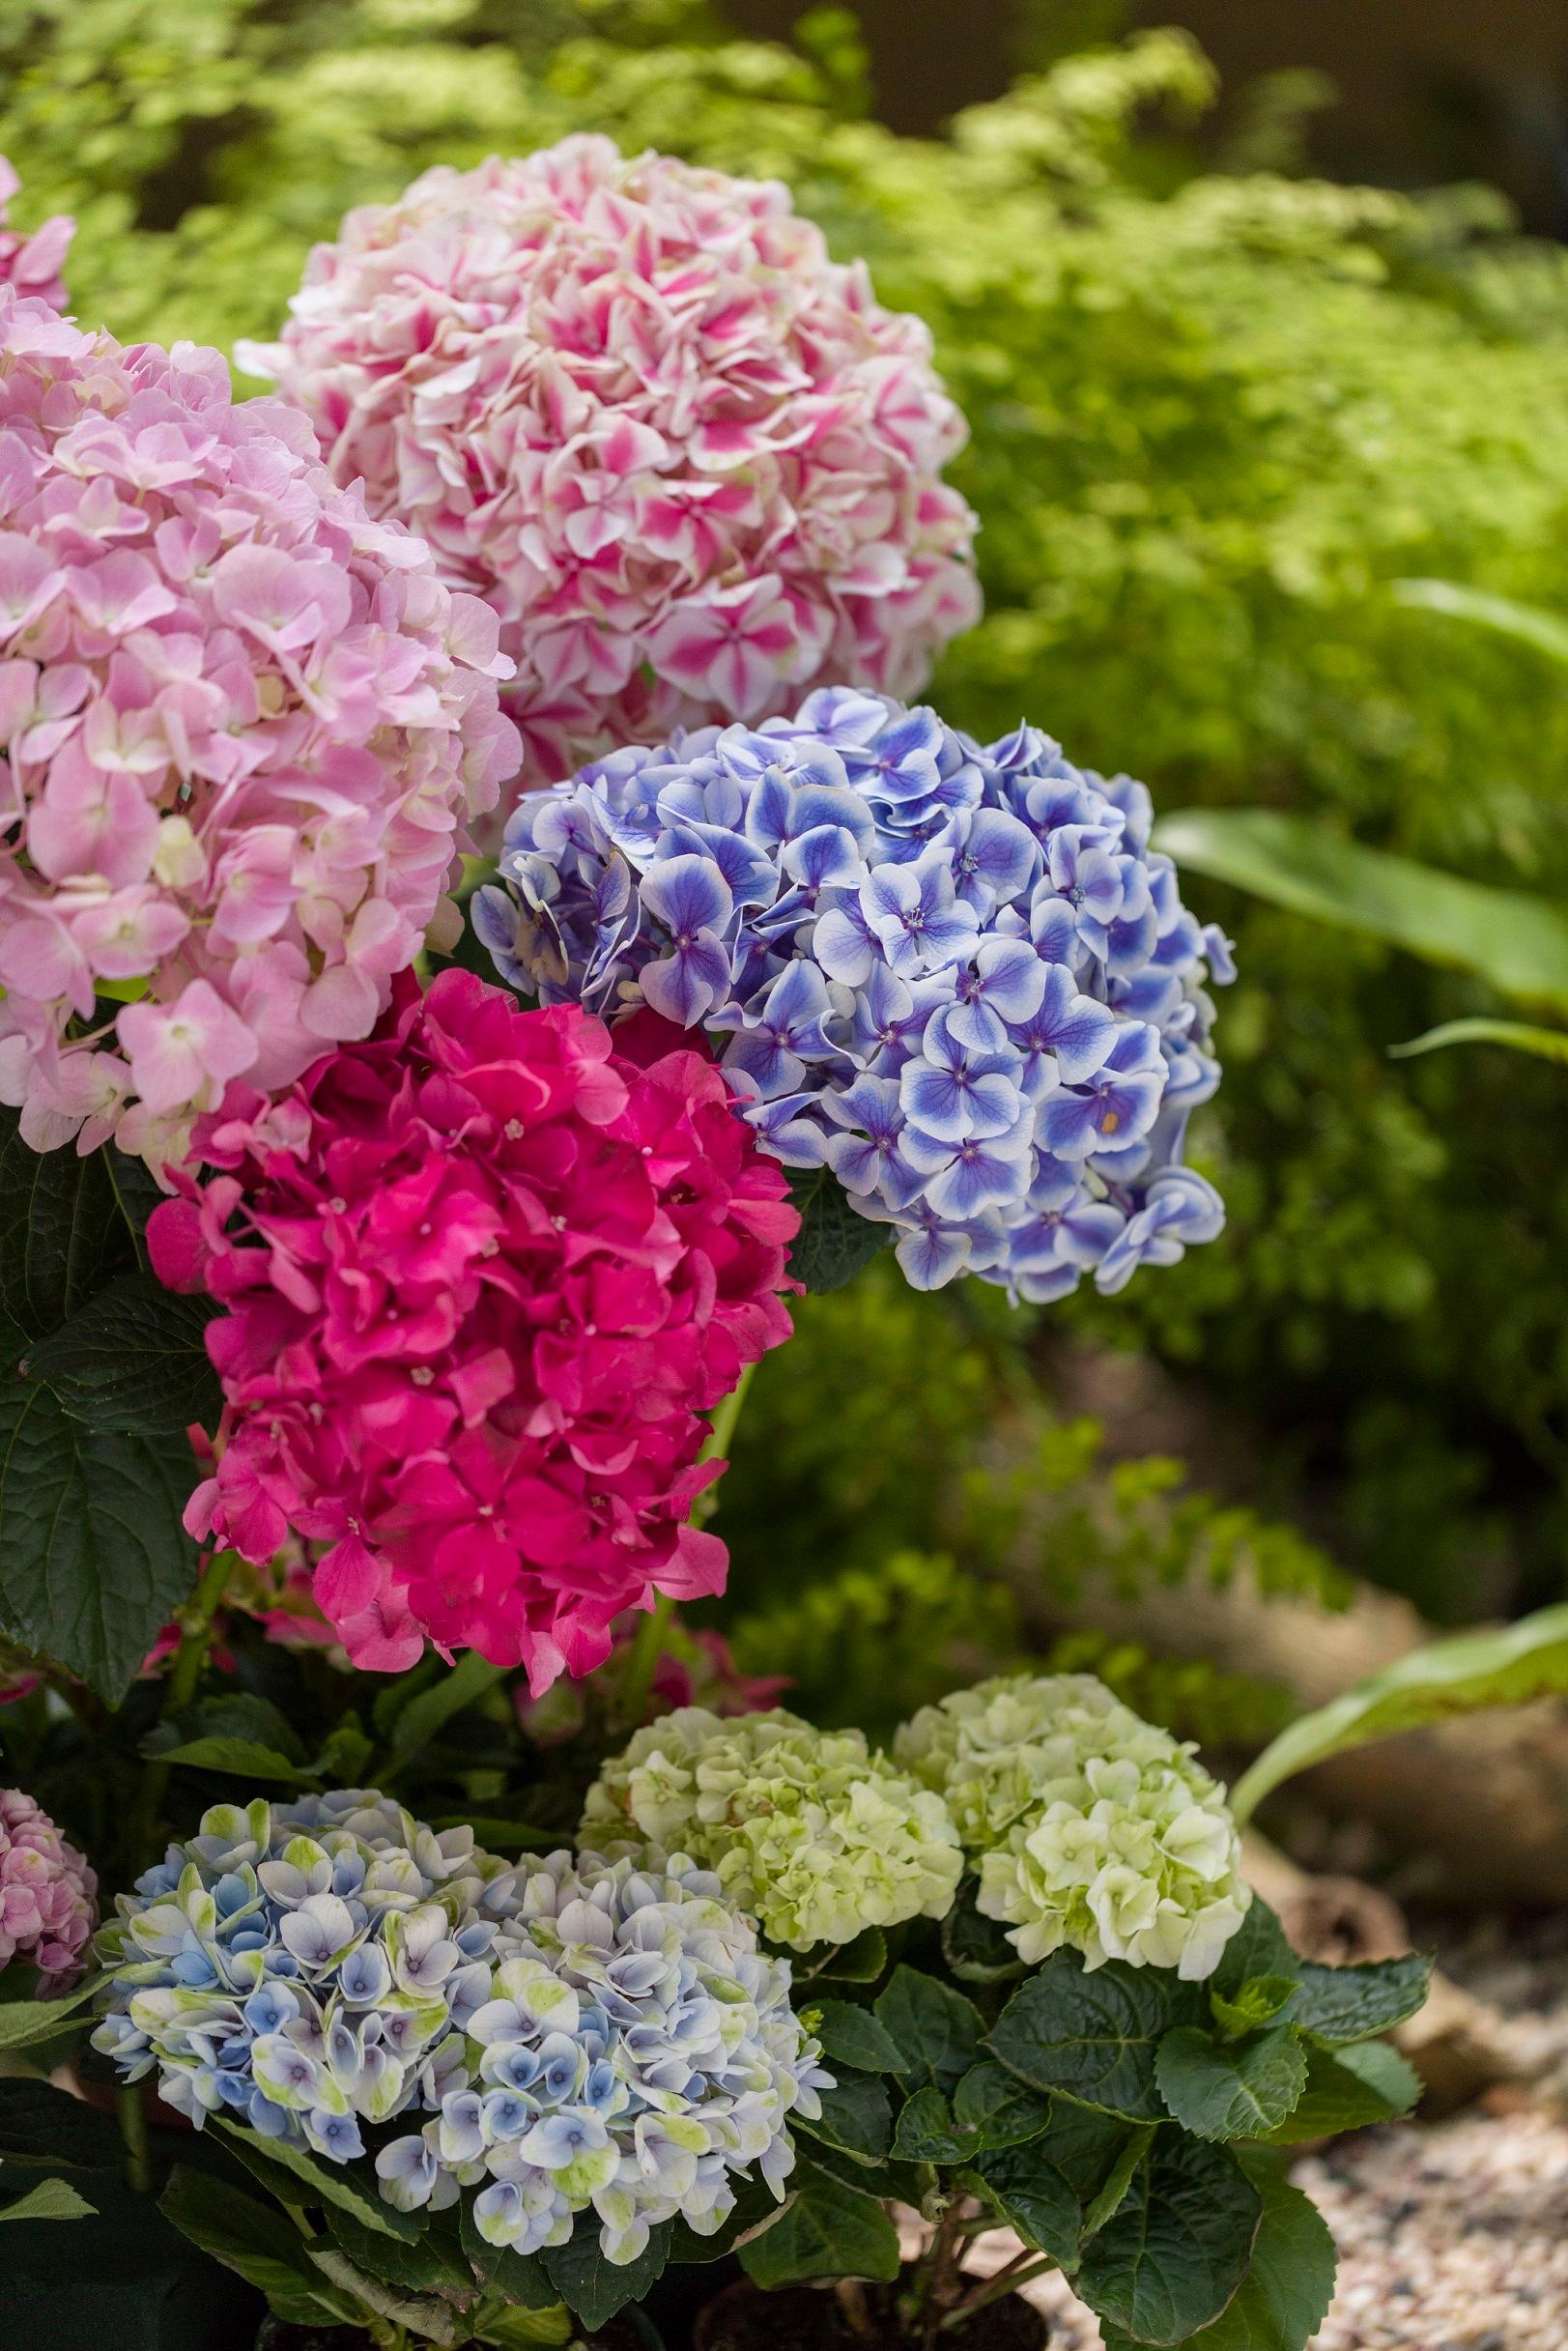 The Hong Kong Flower Show will be held from March 10 to 19 in Victoria Park, with the gorgeous and uniquely grown hydrangea as the theme flower. Common colours of hydrangeas include purple, blue, pink, purple-red, white and green.